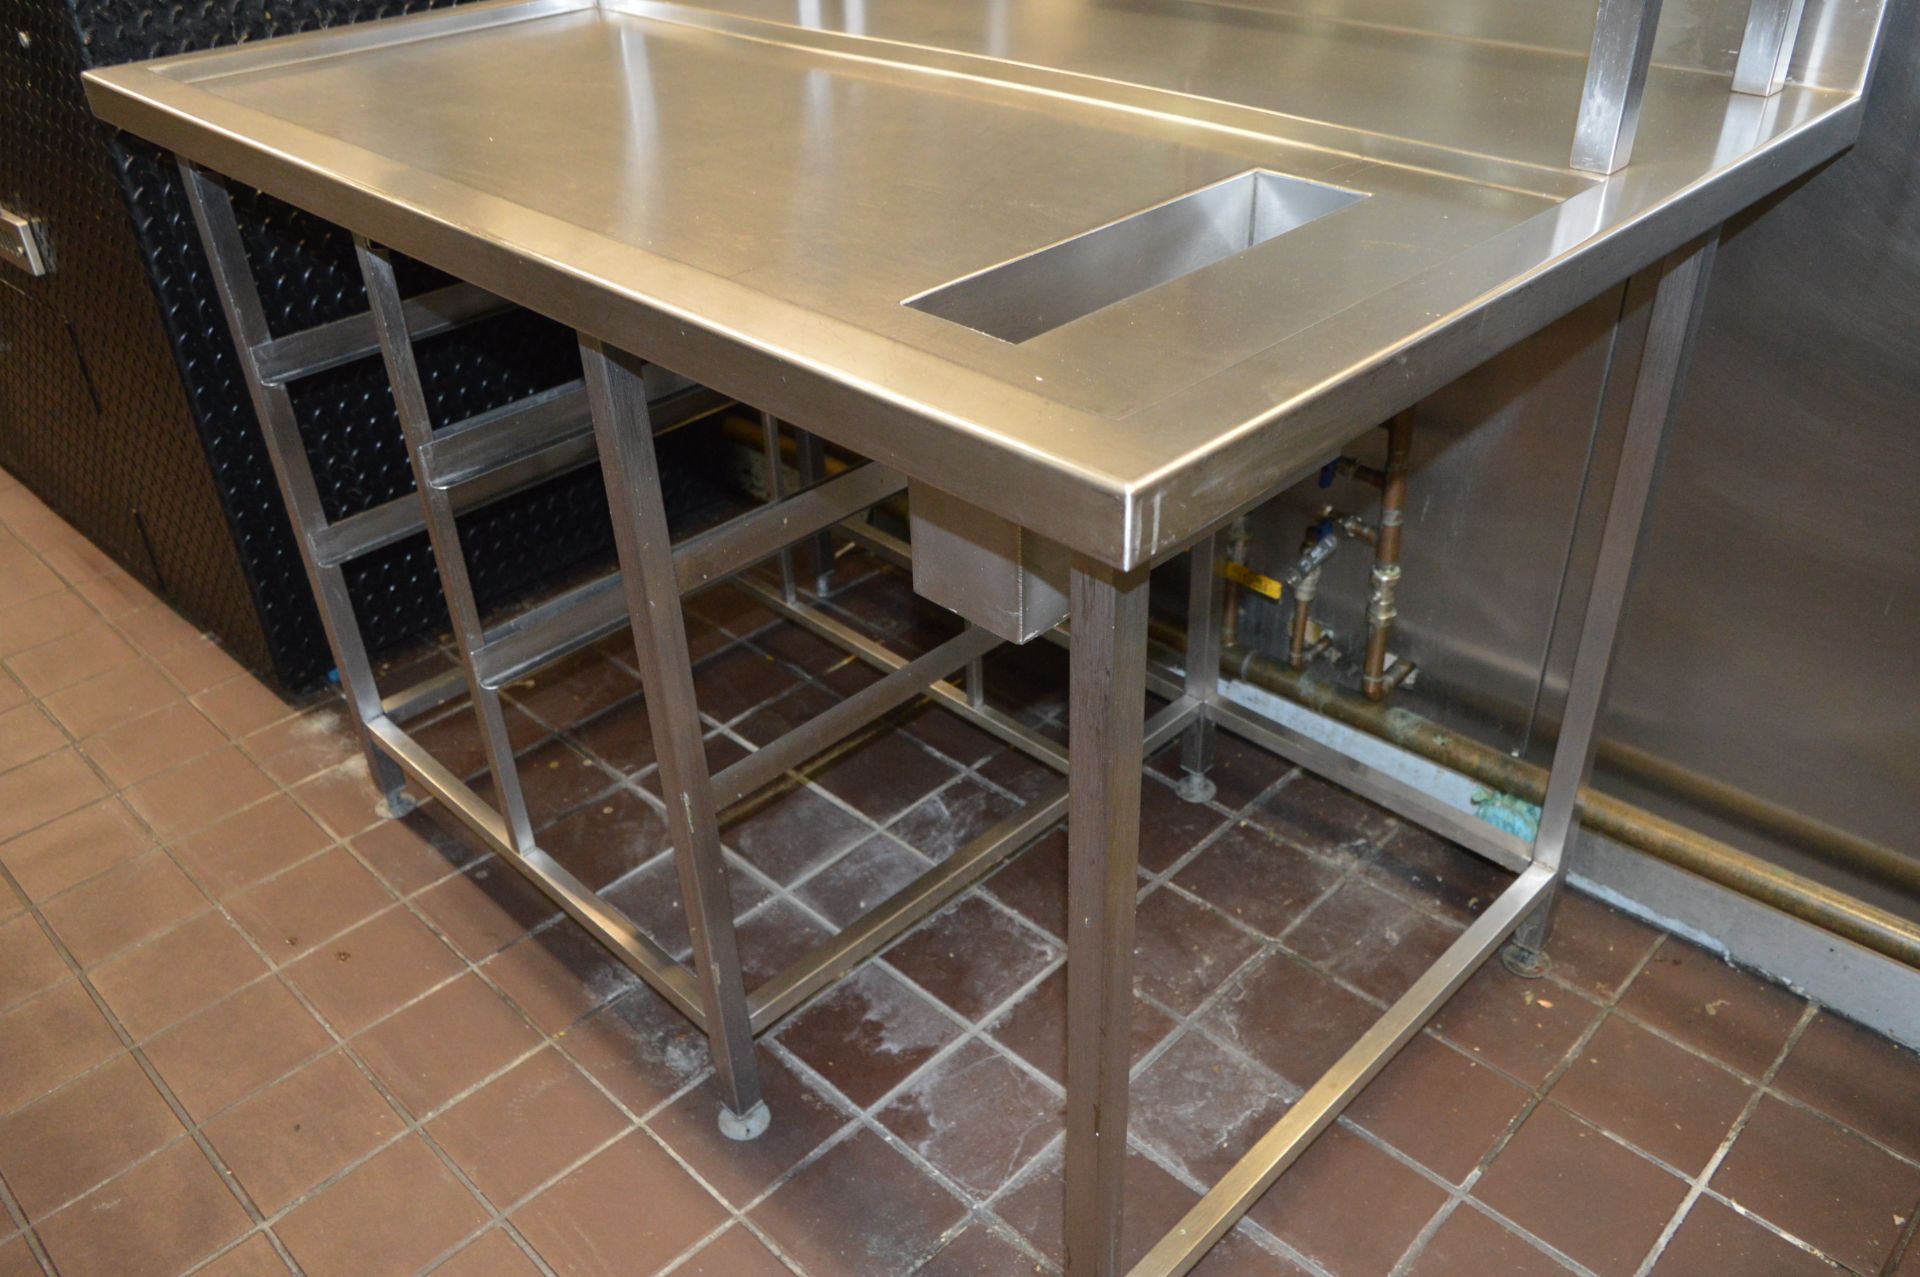 1 x Stainless Steel Prep Bench With Undercounter Shelves, Bin Chute and Overhead Shelves - H87/171 x - Image 7 of 7